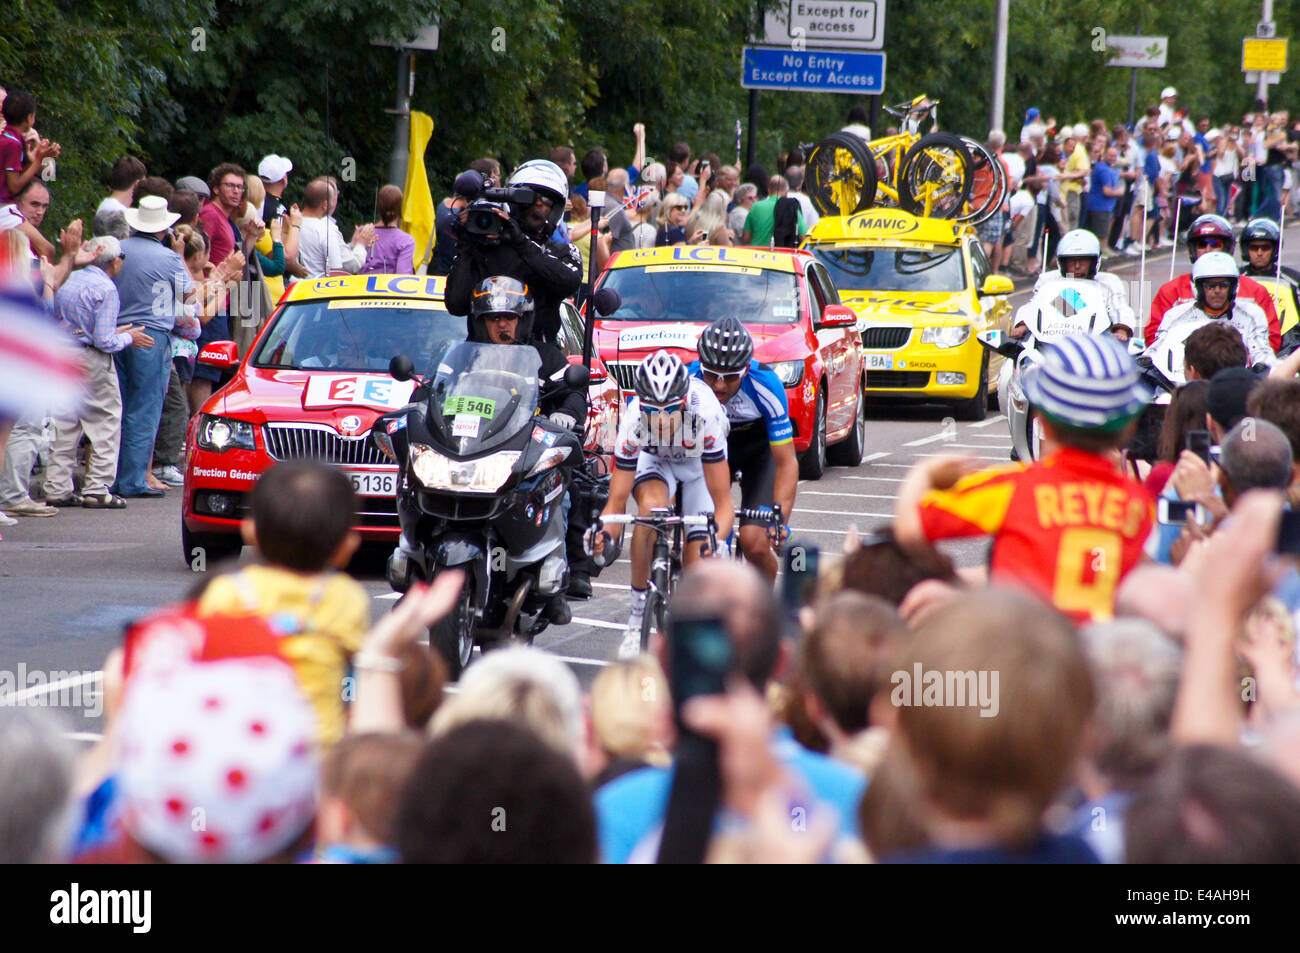 Woodford, London, UK. 07th July, 2014. Tour de France Stage 3: Hundreds line the route as Jean-Marc Rideau (in front) and Jan Barta still in front after leading for the entire race. Woodford, London. Credit:  Mark Dunn/Alamy Live News Stock Photo